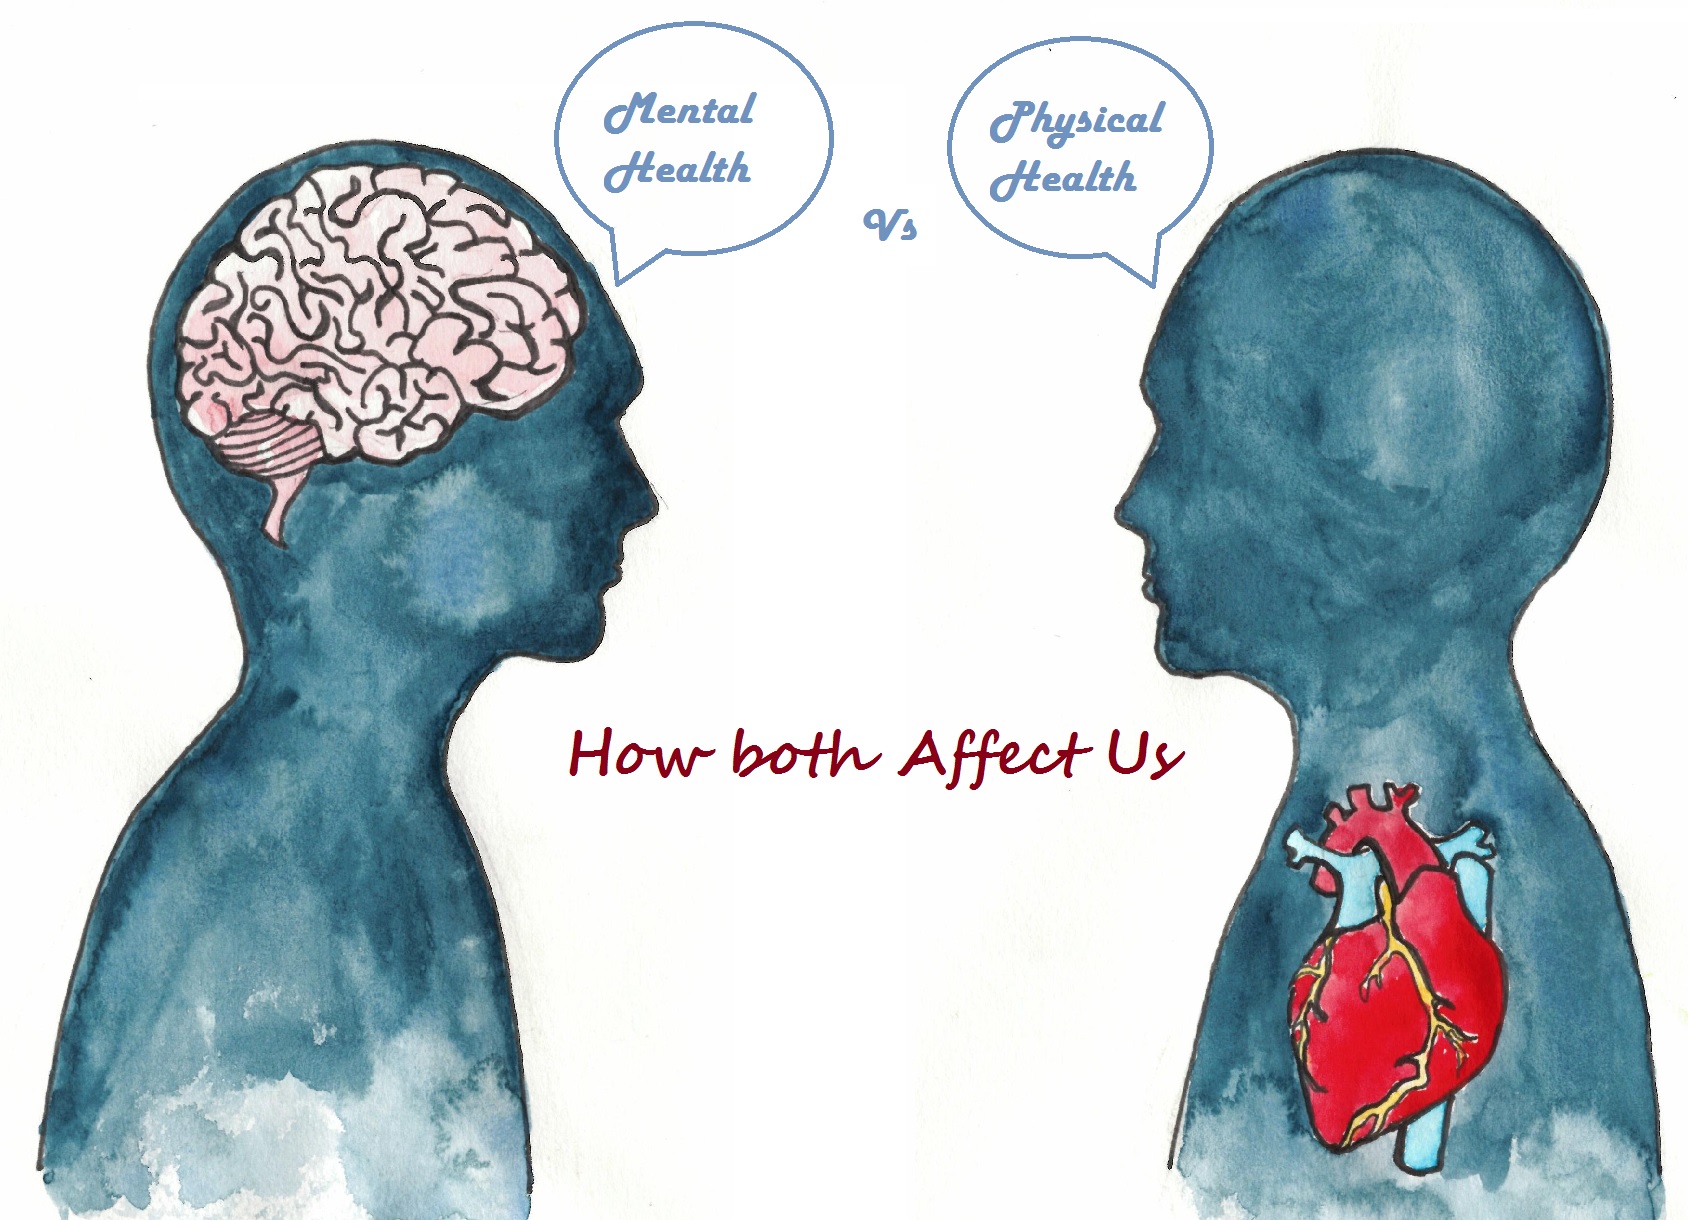 mental-health-vs-physical-health-how-both-affect-us